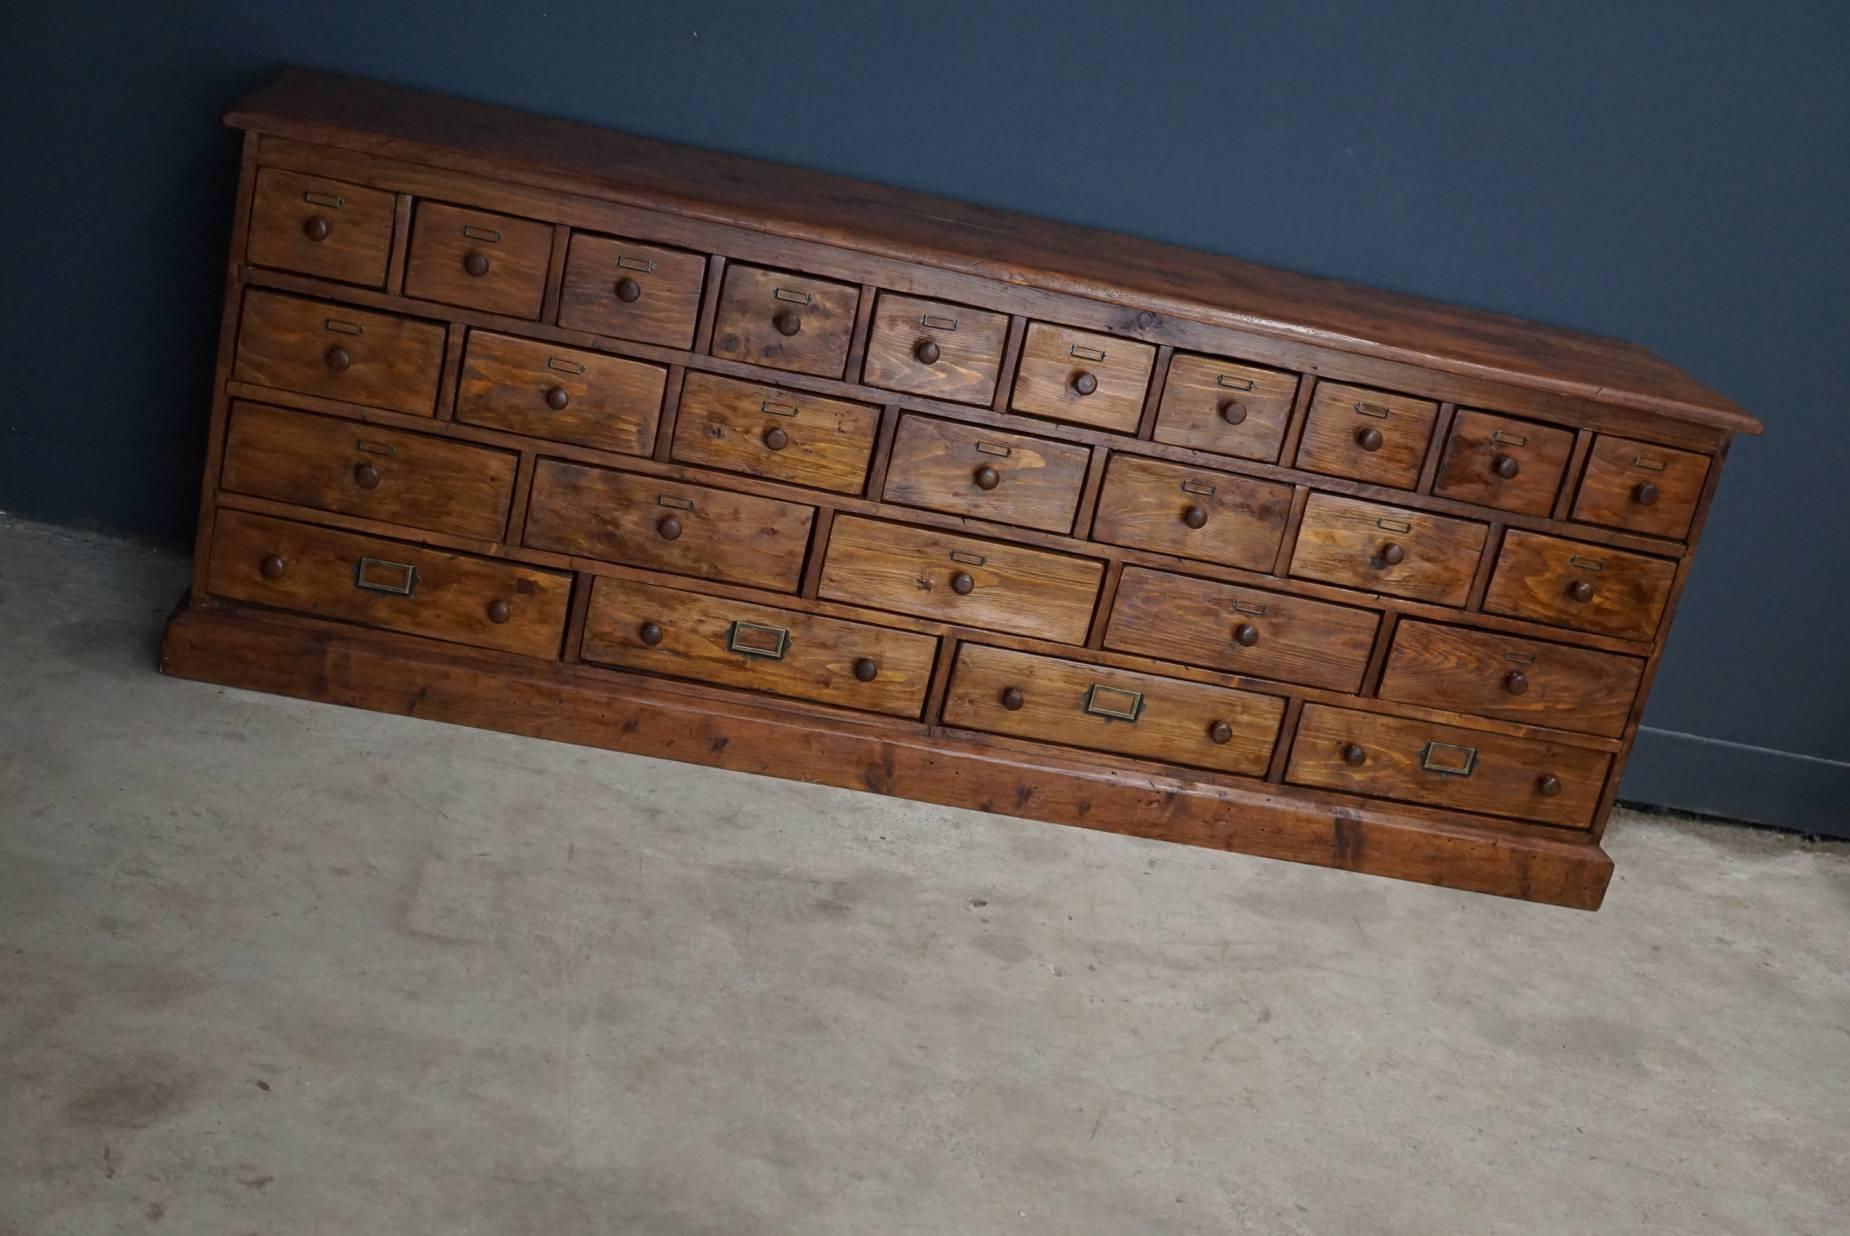 This apothecary cabinet of drawers was designed, circa 1900s in Germany. The piece is made from pine and is in a good vintage condition.